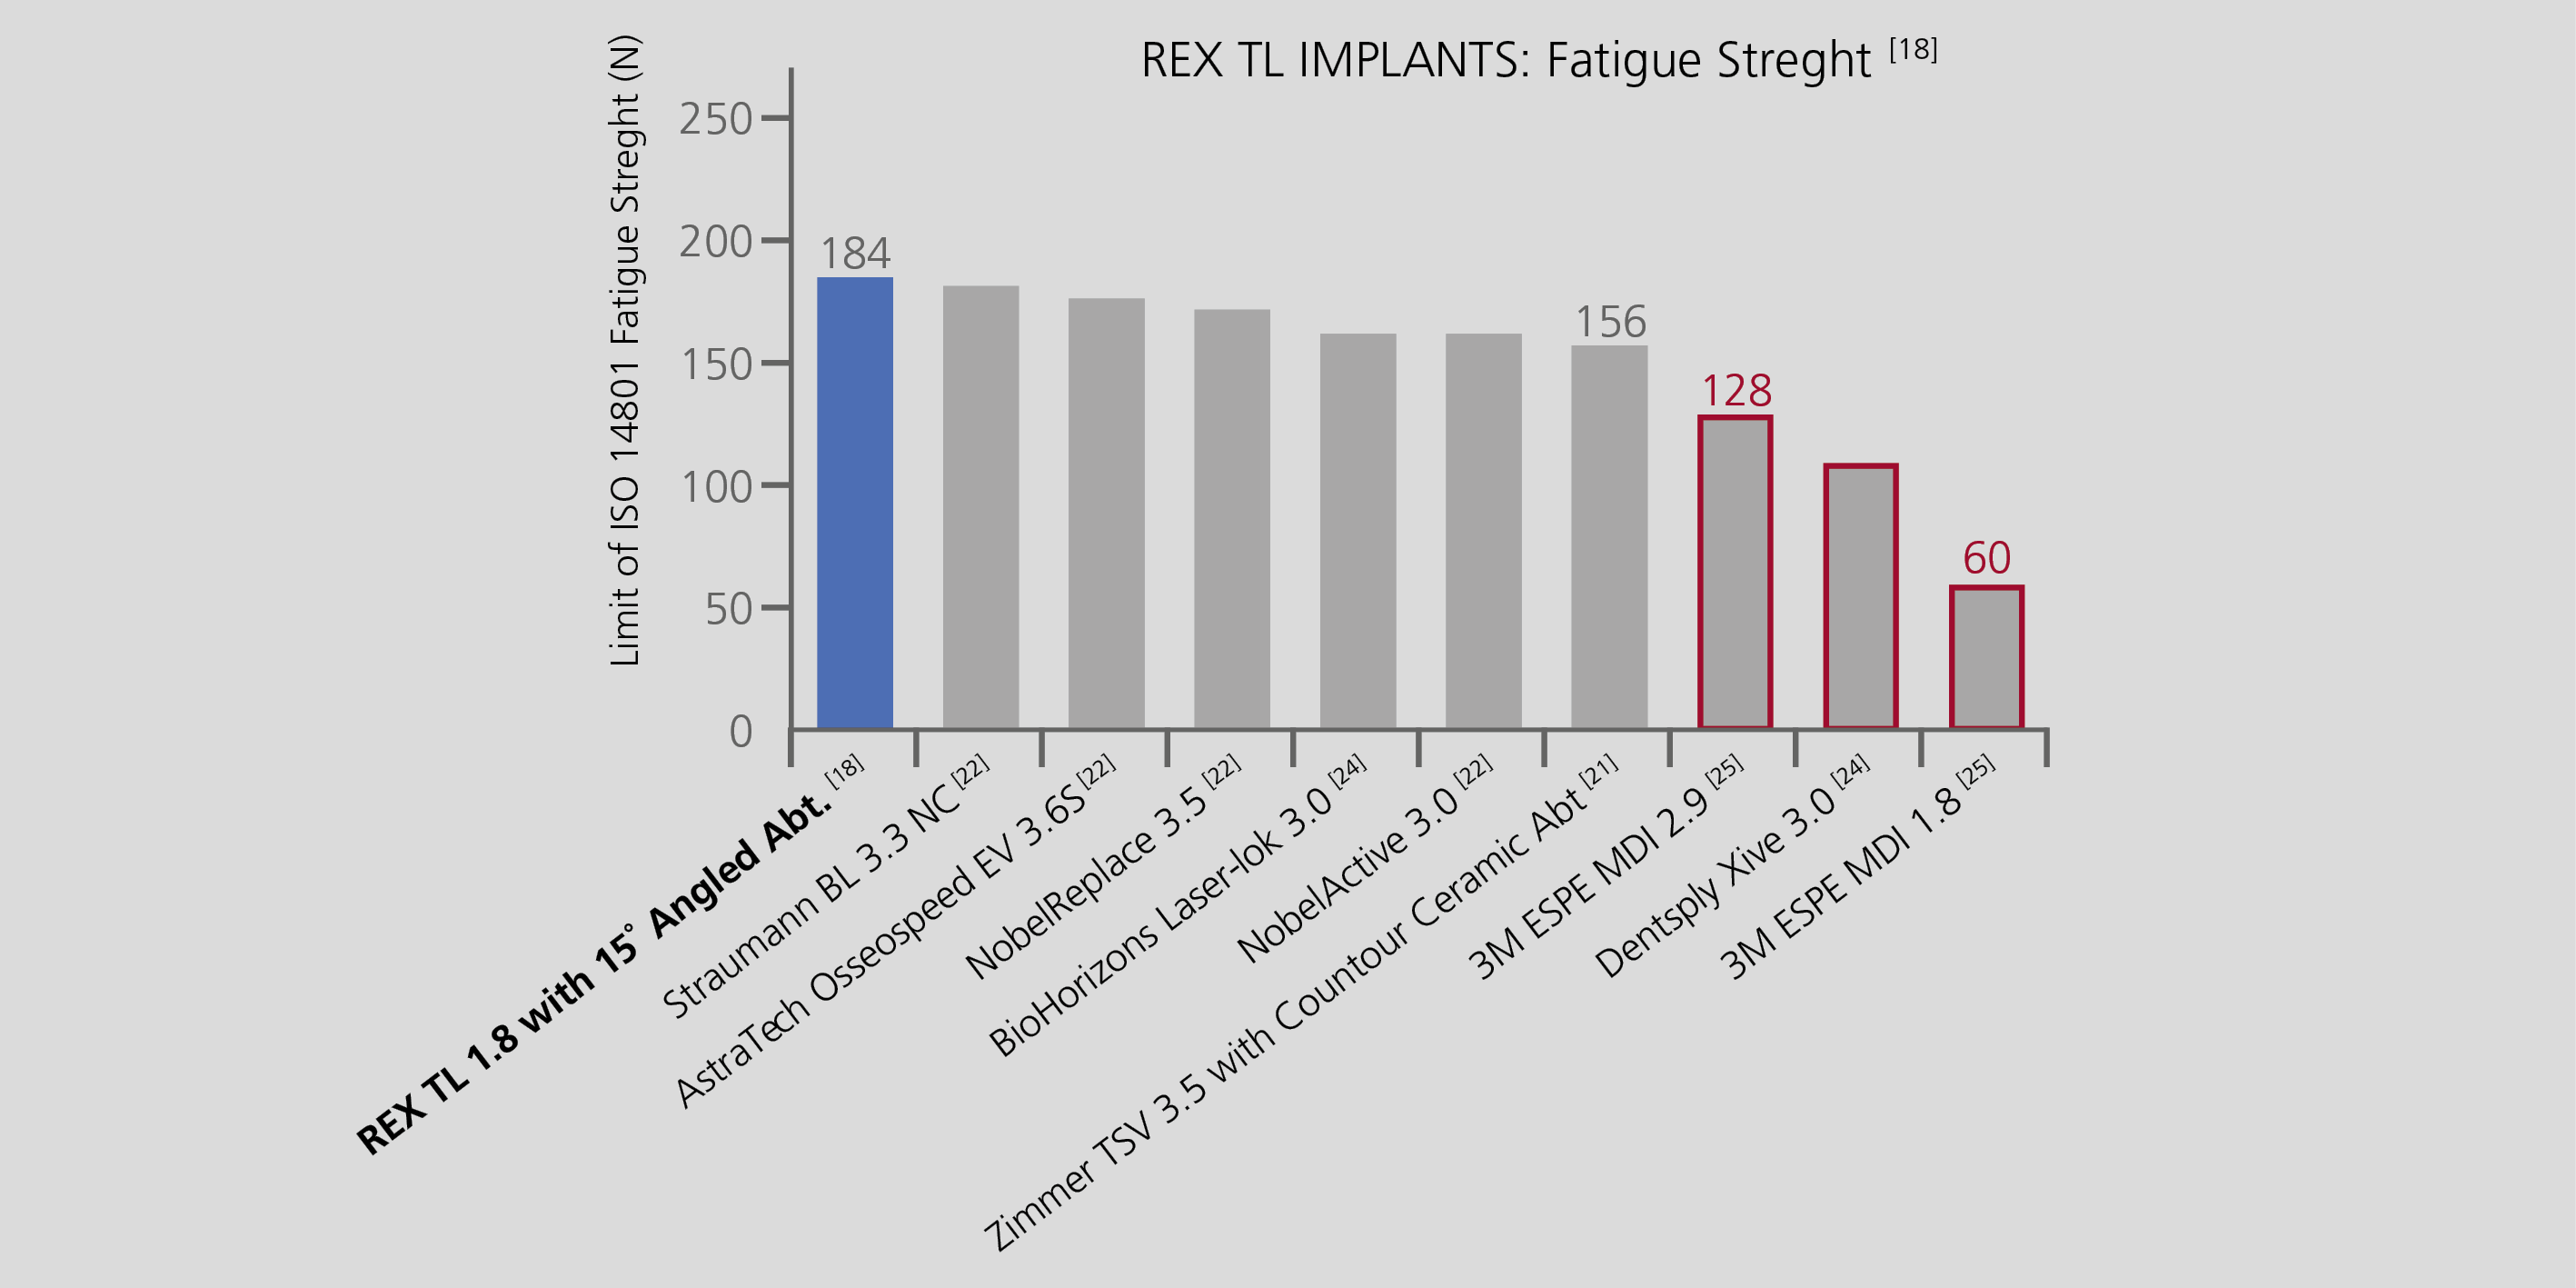 REX PiezoImplant, more resistant than a traditional 3.5 mm implant